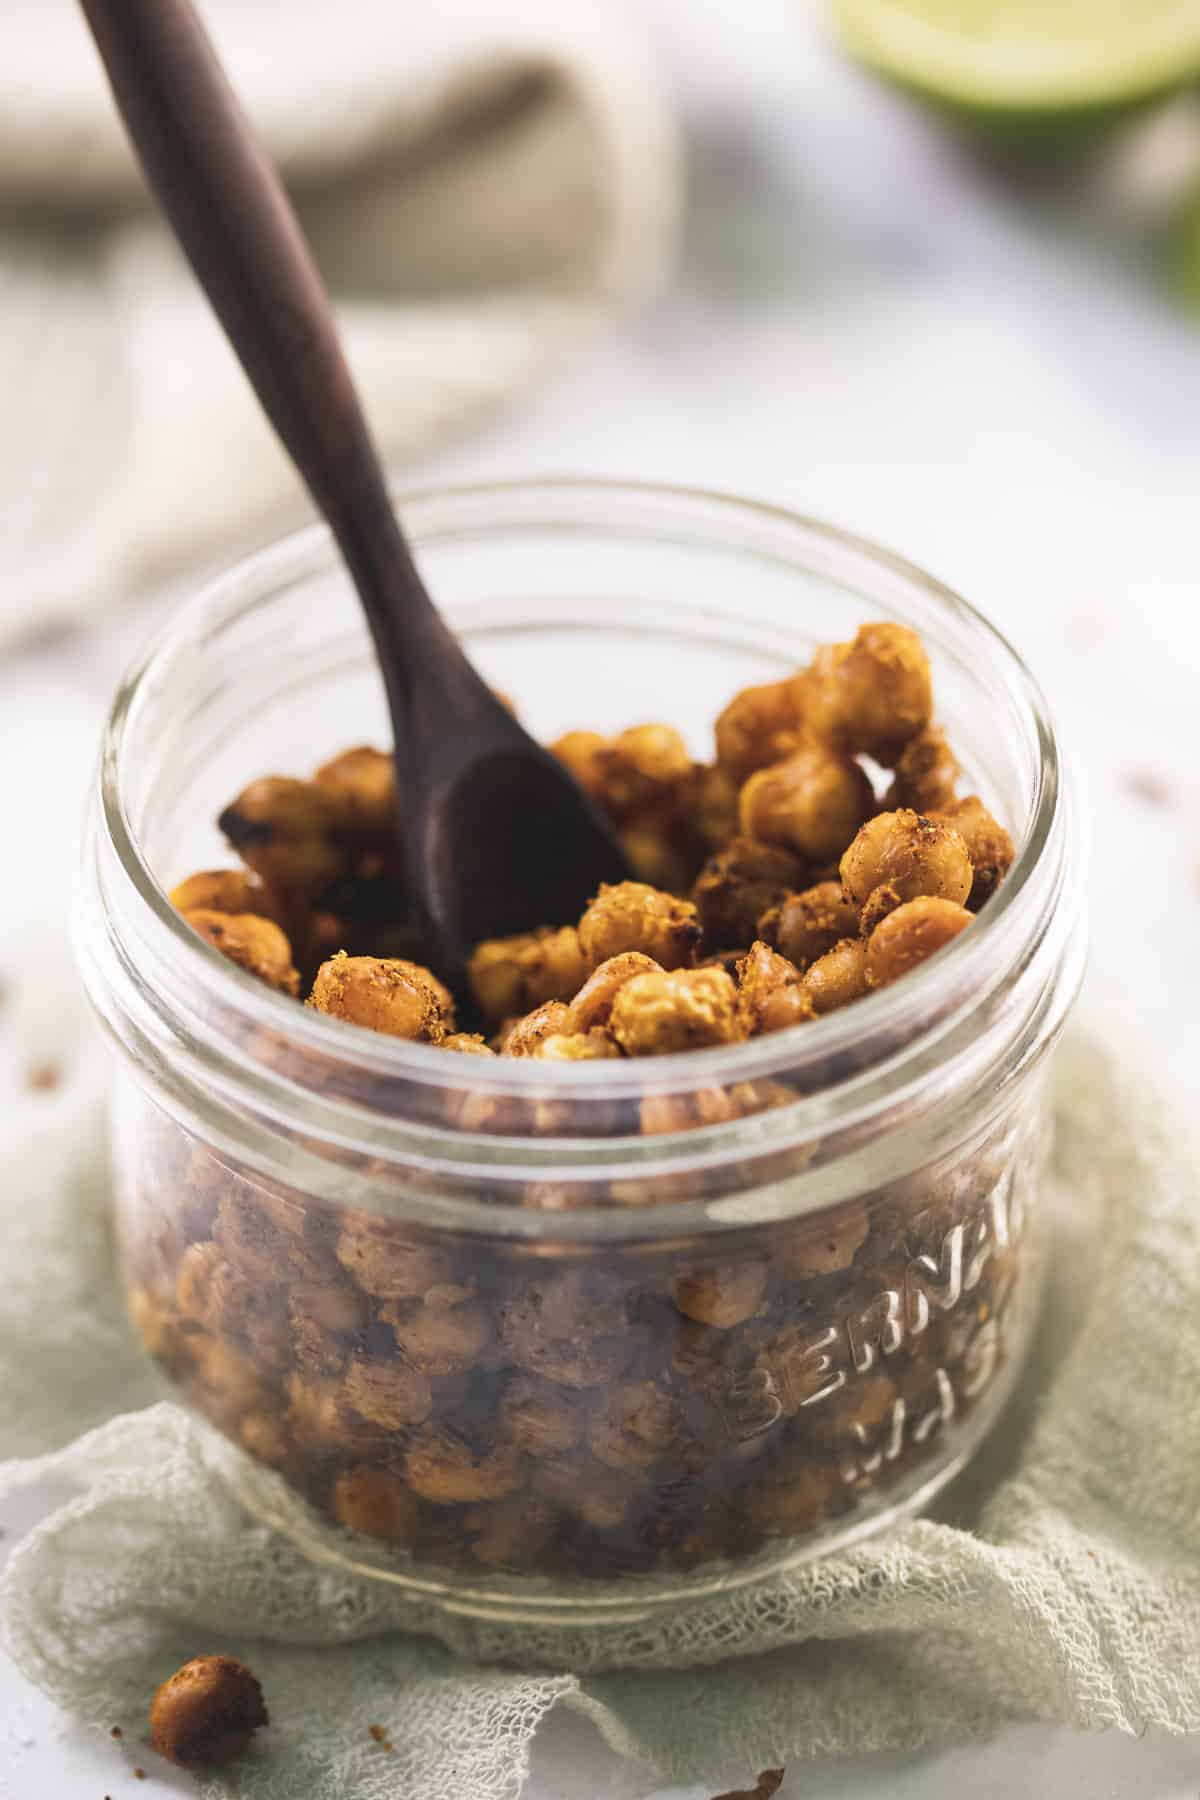 A wooden spoon resting in a jar for roasted chickpeas on a sage cheesecloth with spilt crumbs surrounding and a freshly sliced lime in the background.